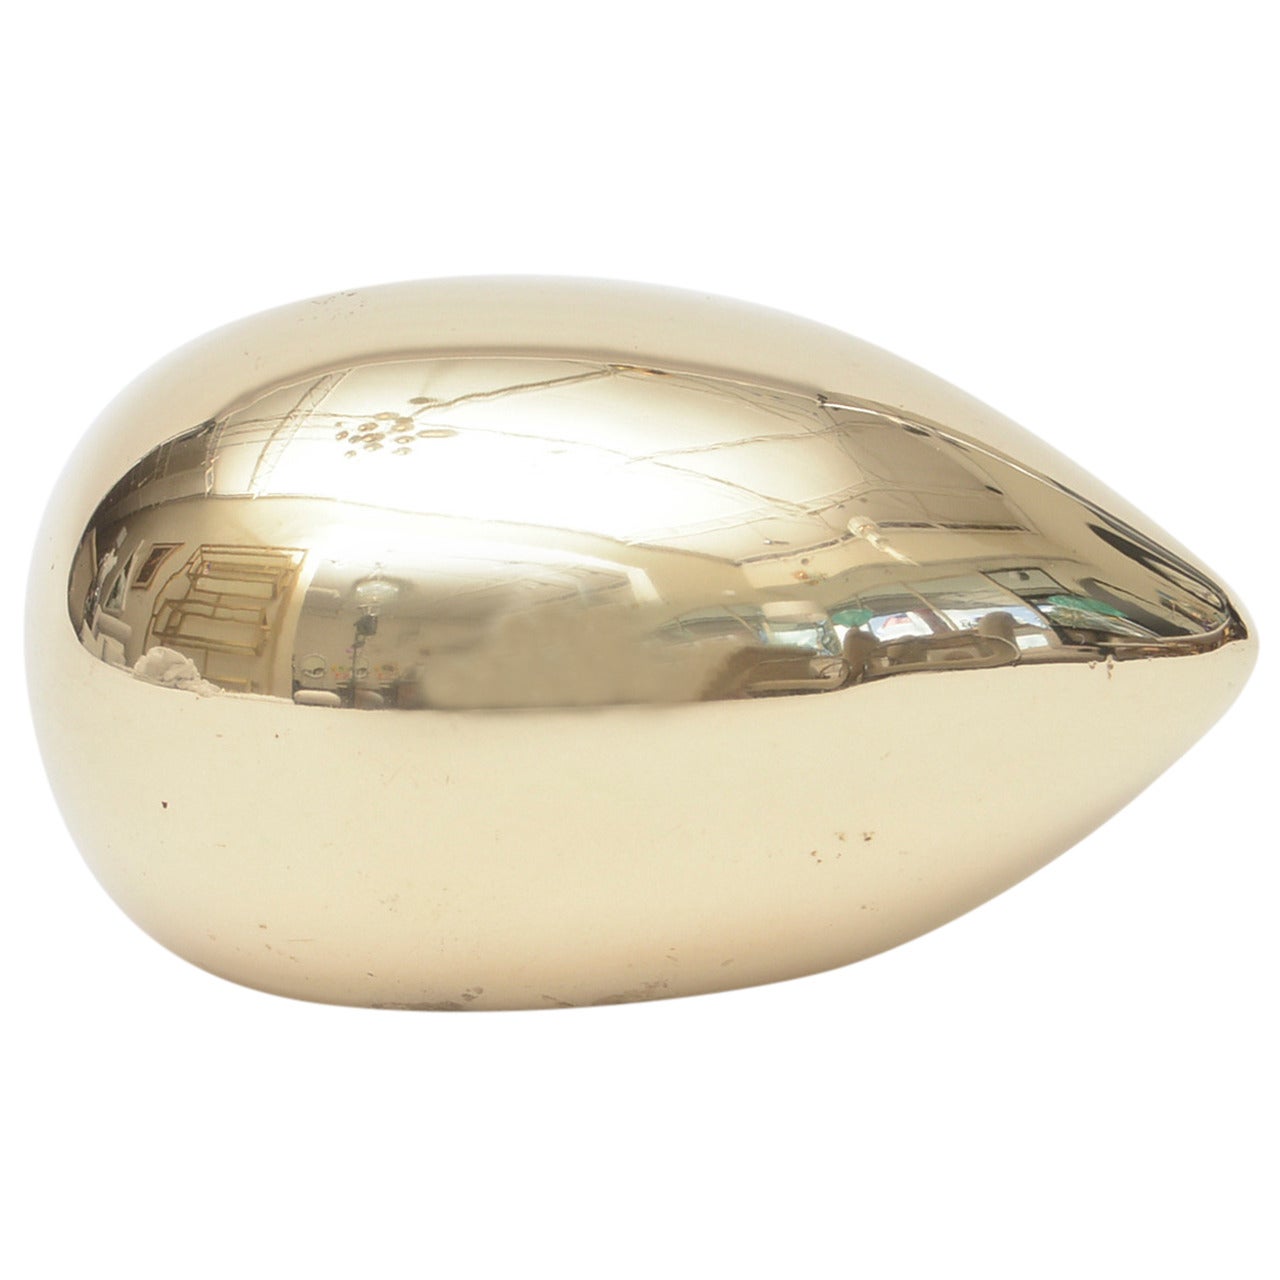 Carl Aubock Polished Brass Sculptural Paperweight or Object